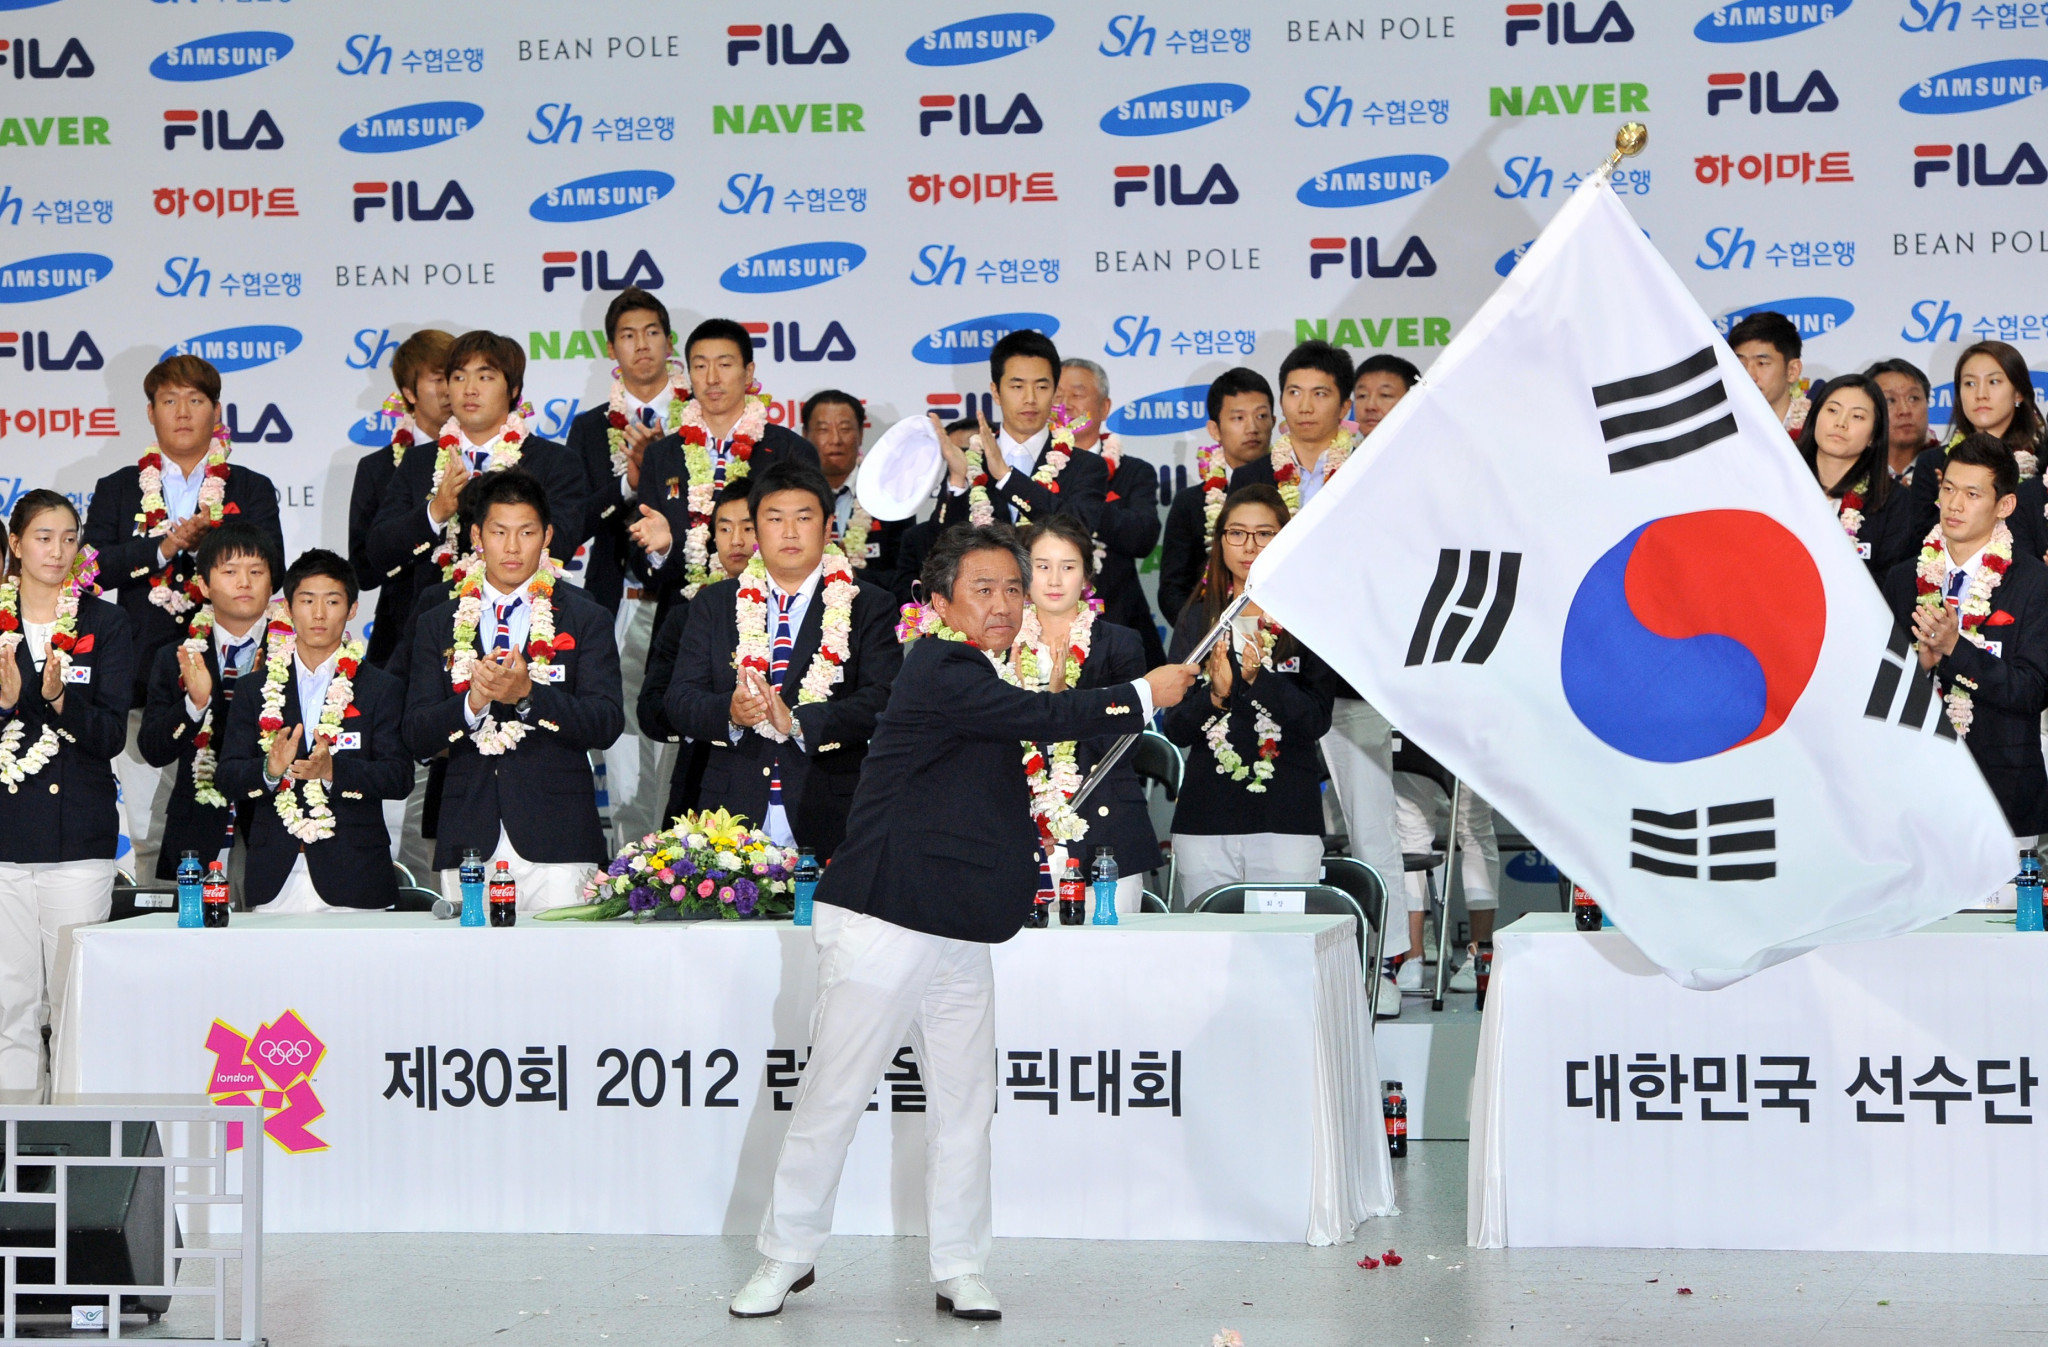 Lee Kee-heung was the Chef de Mission for South Korea at the 2012 London Olympics ©Getty Images